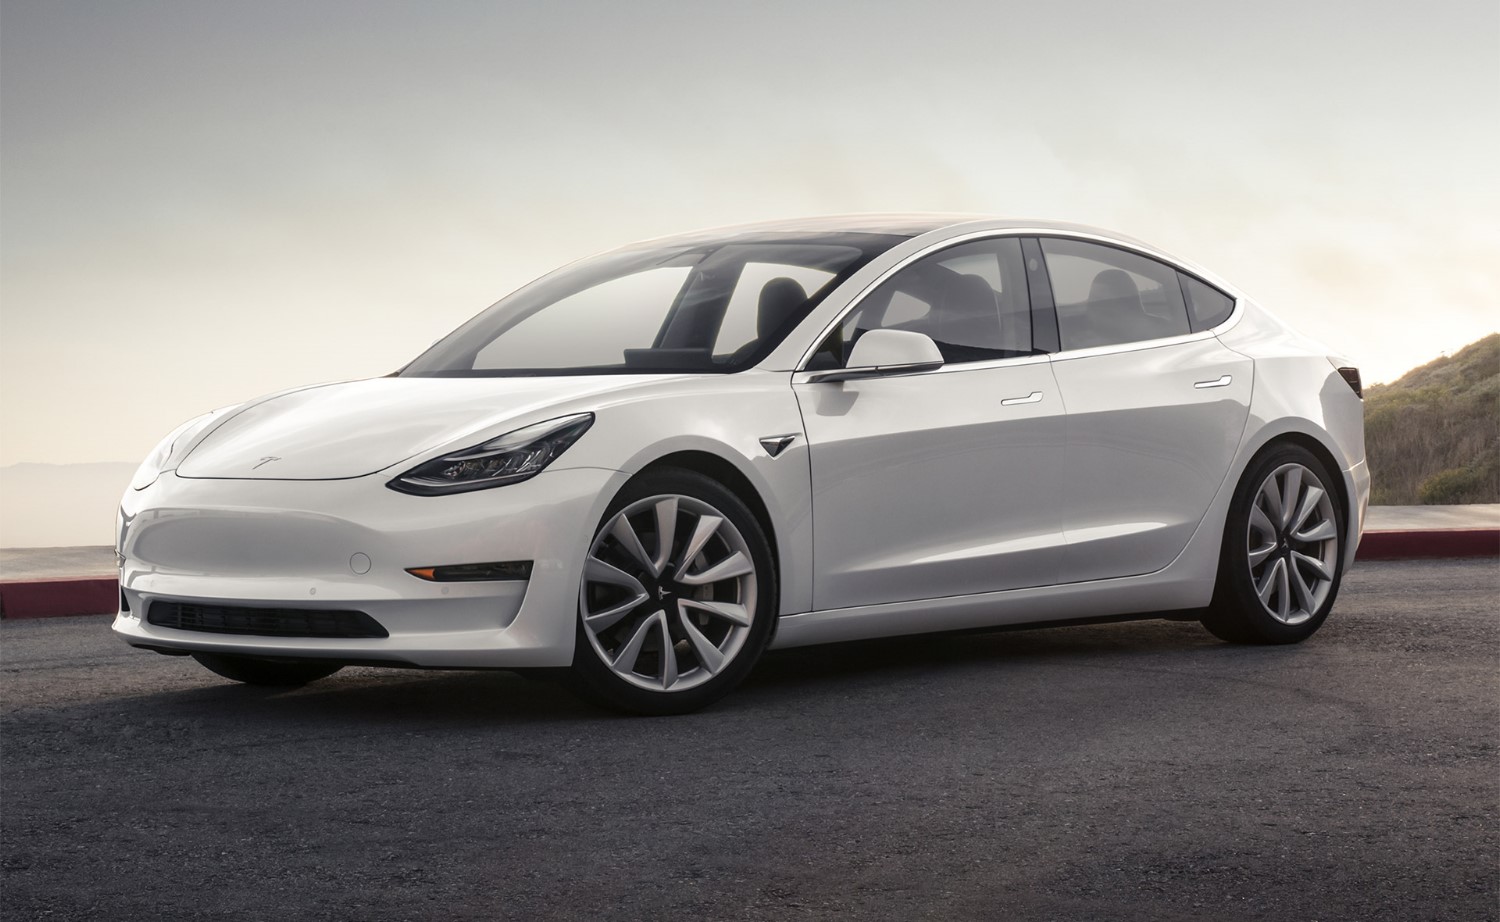 The Tesla Model 3 in Mountain Pearl White. The Model 3 remain the best selling car in America